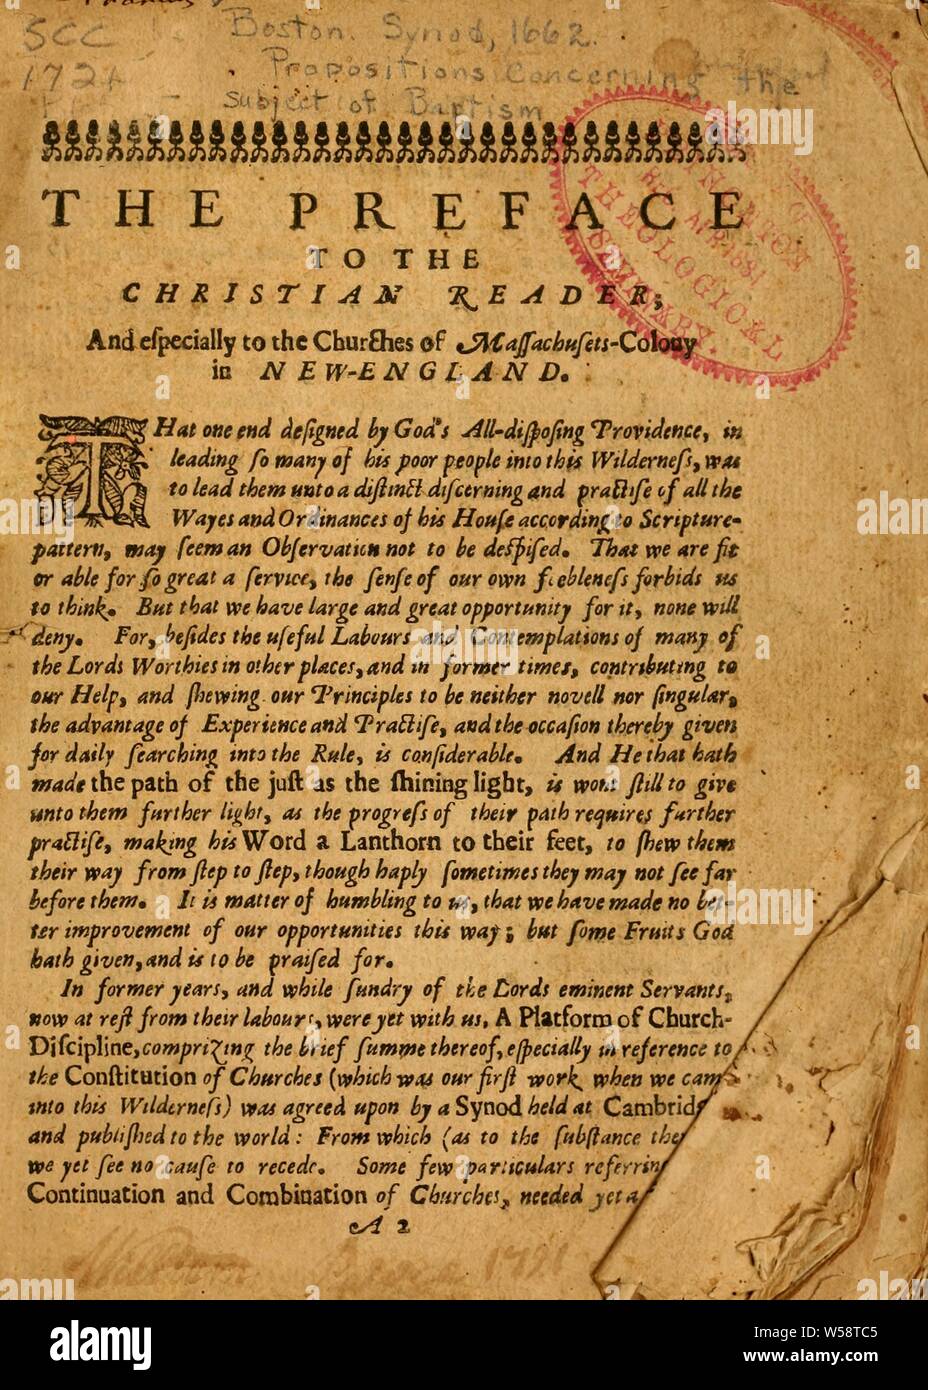 Propositions concerning the subject of baptism and consociation of churches, collected and confirmed out of the word of God, by a synod of elders and messengers of the churches in Massachusetts-Colony in New England. Assembled at Boston, ... in the year 1662. .. : Congregational Churches in Massachusetts. Boston synod, 1662 Stock Photo